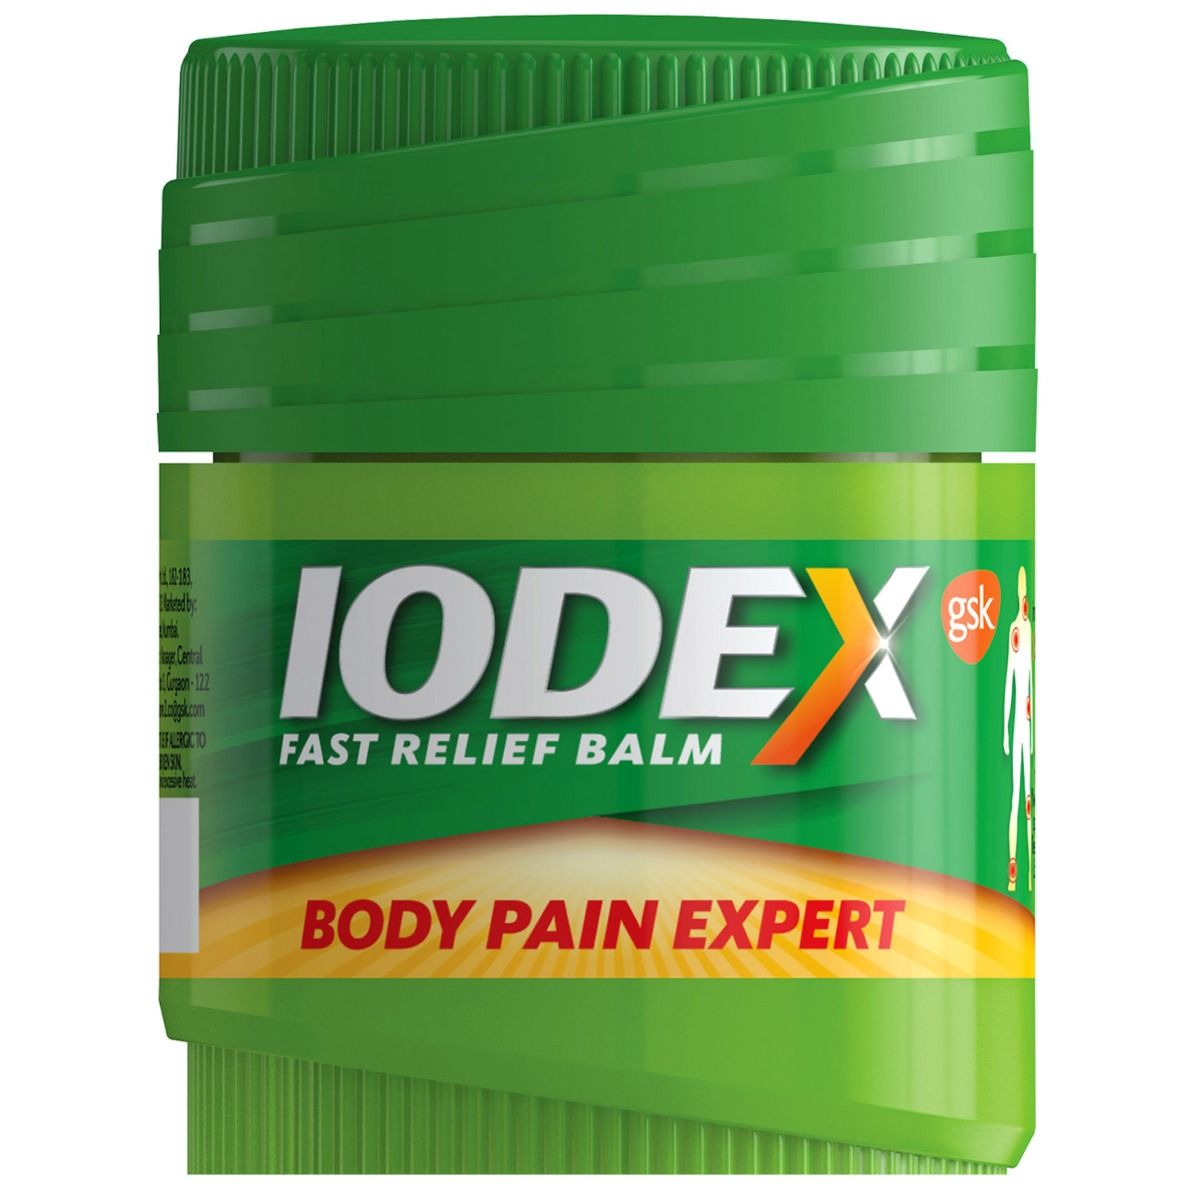 Buy Iodex Fast Relief Balm, 16 gm Online